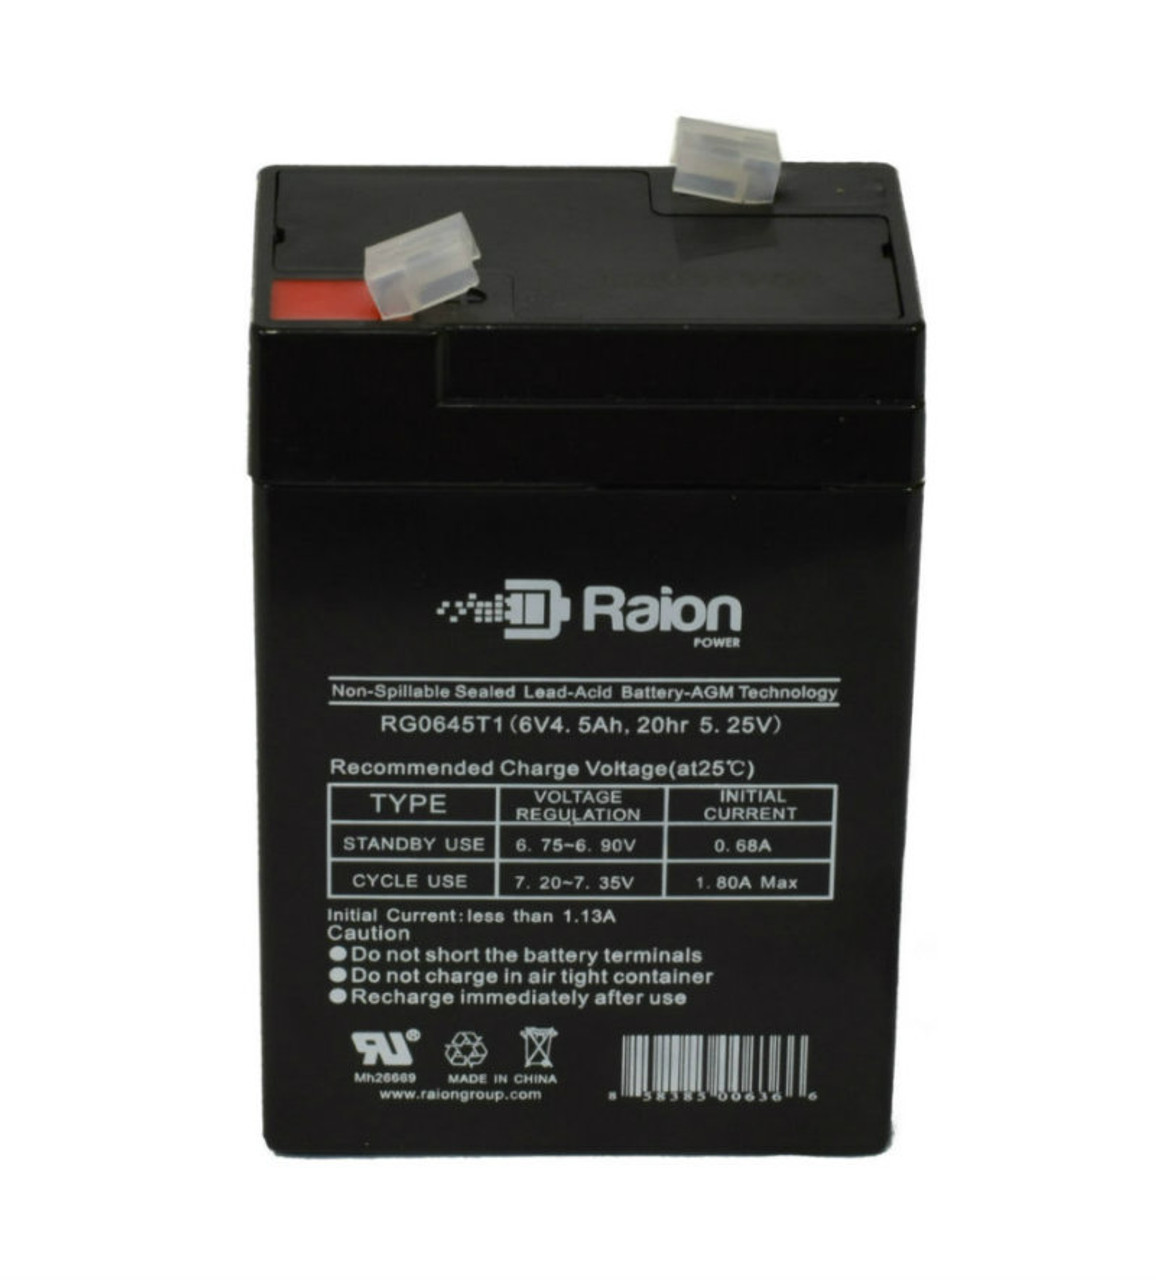 Raion Power RG0645T1 Replacement Battery Cartridge for Lithonia Q4